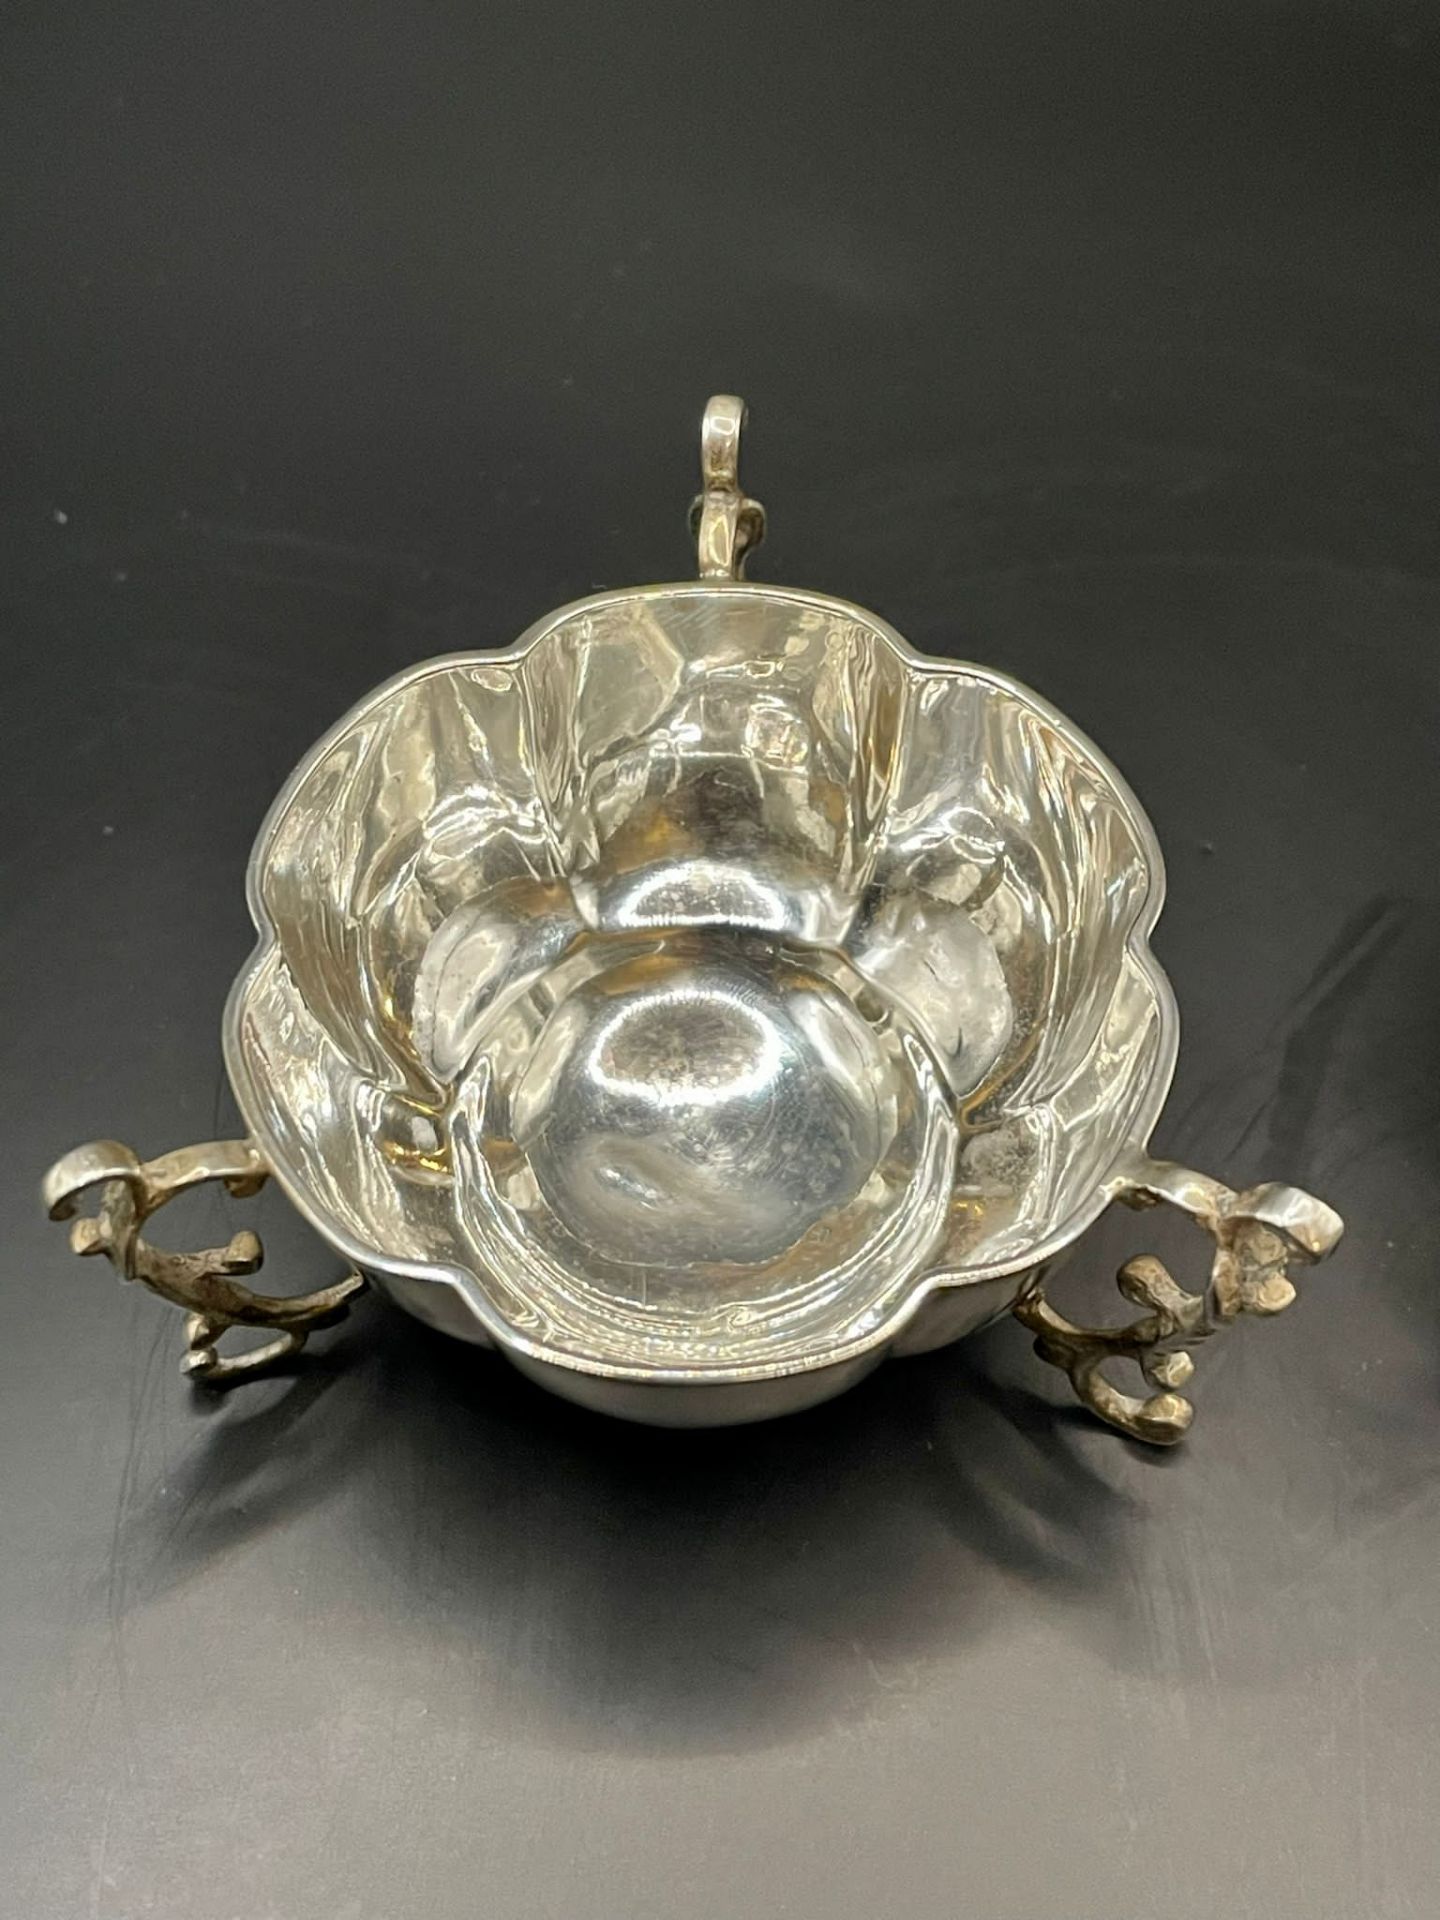 Antique Solid Silver Salt Dishes Fully Hallmarked .- JD over WD in lozenge for James Deakin & Sons J - Image 5 of 15